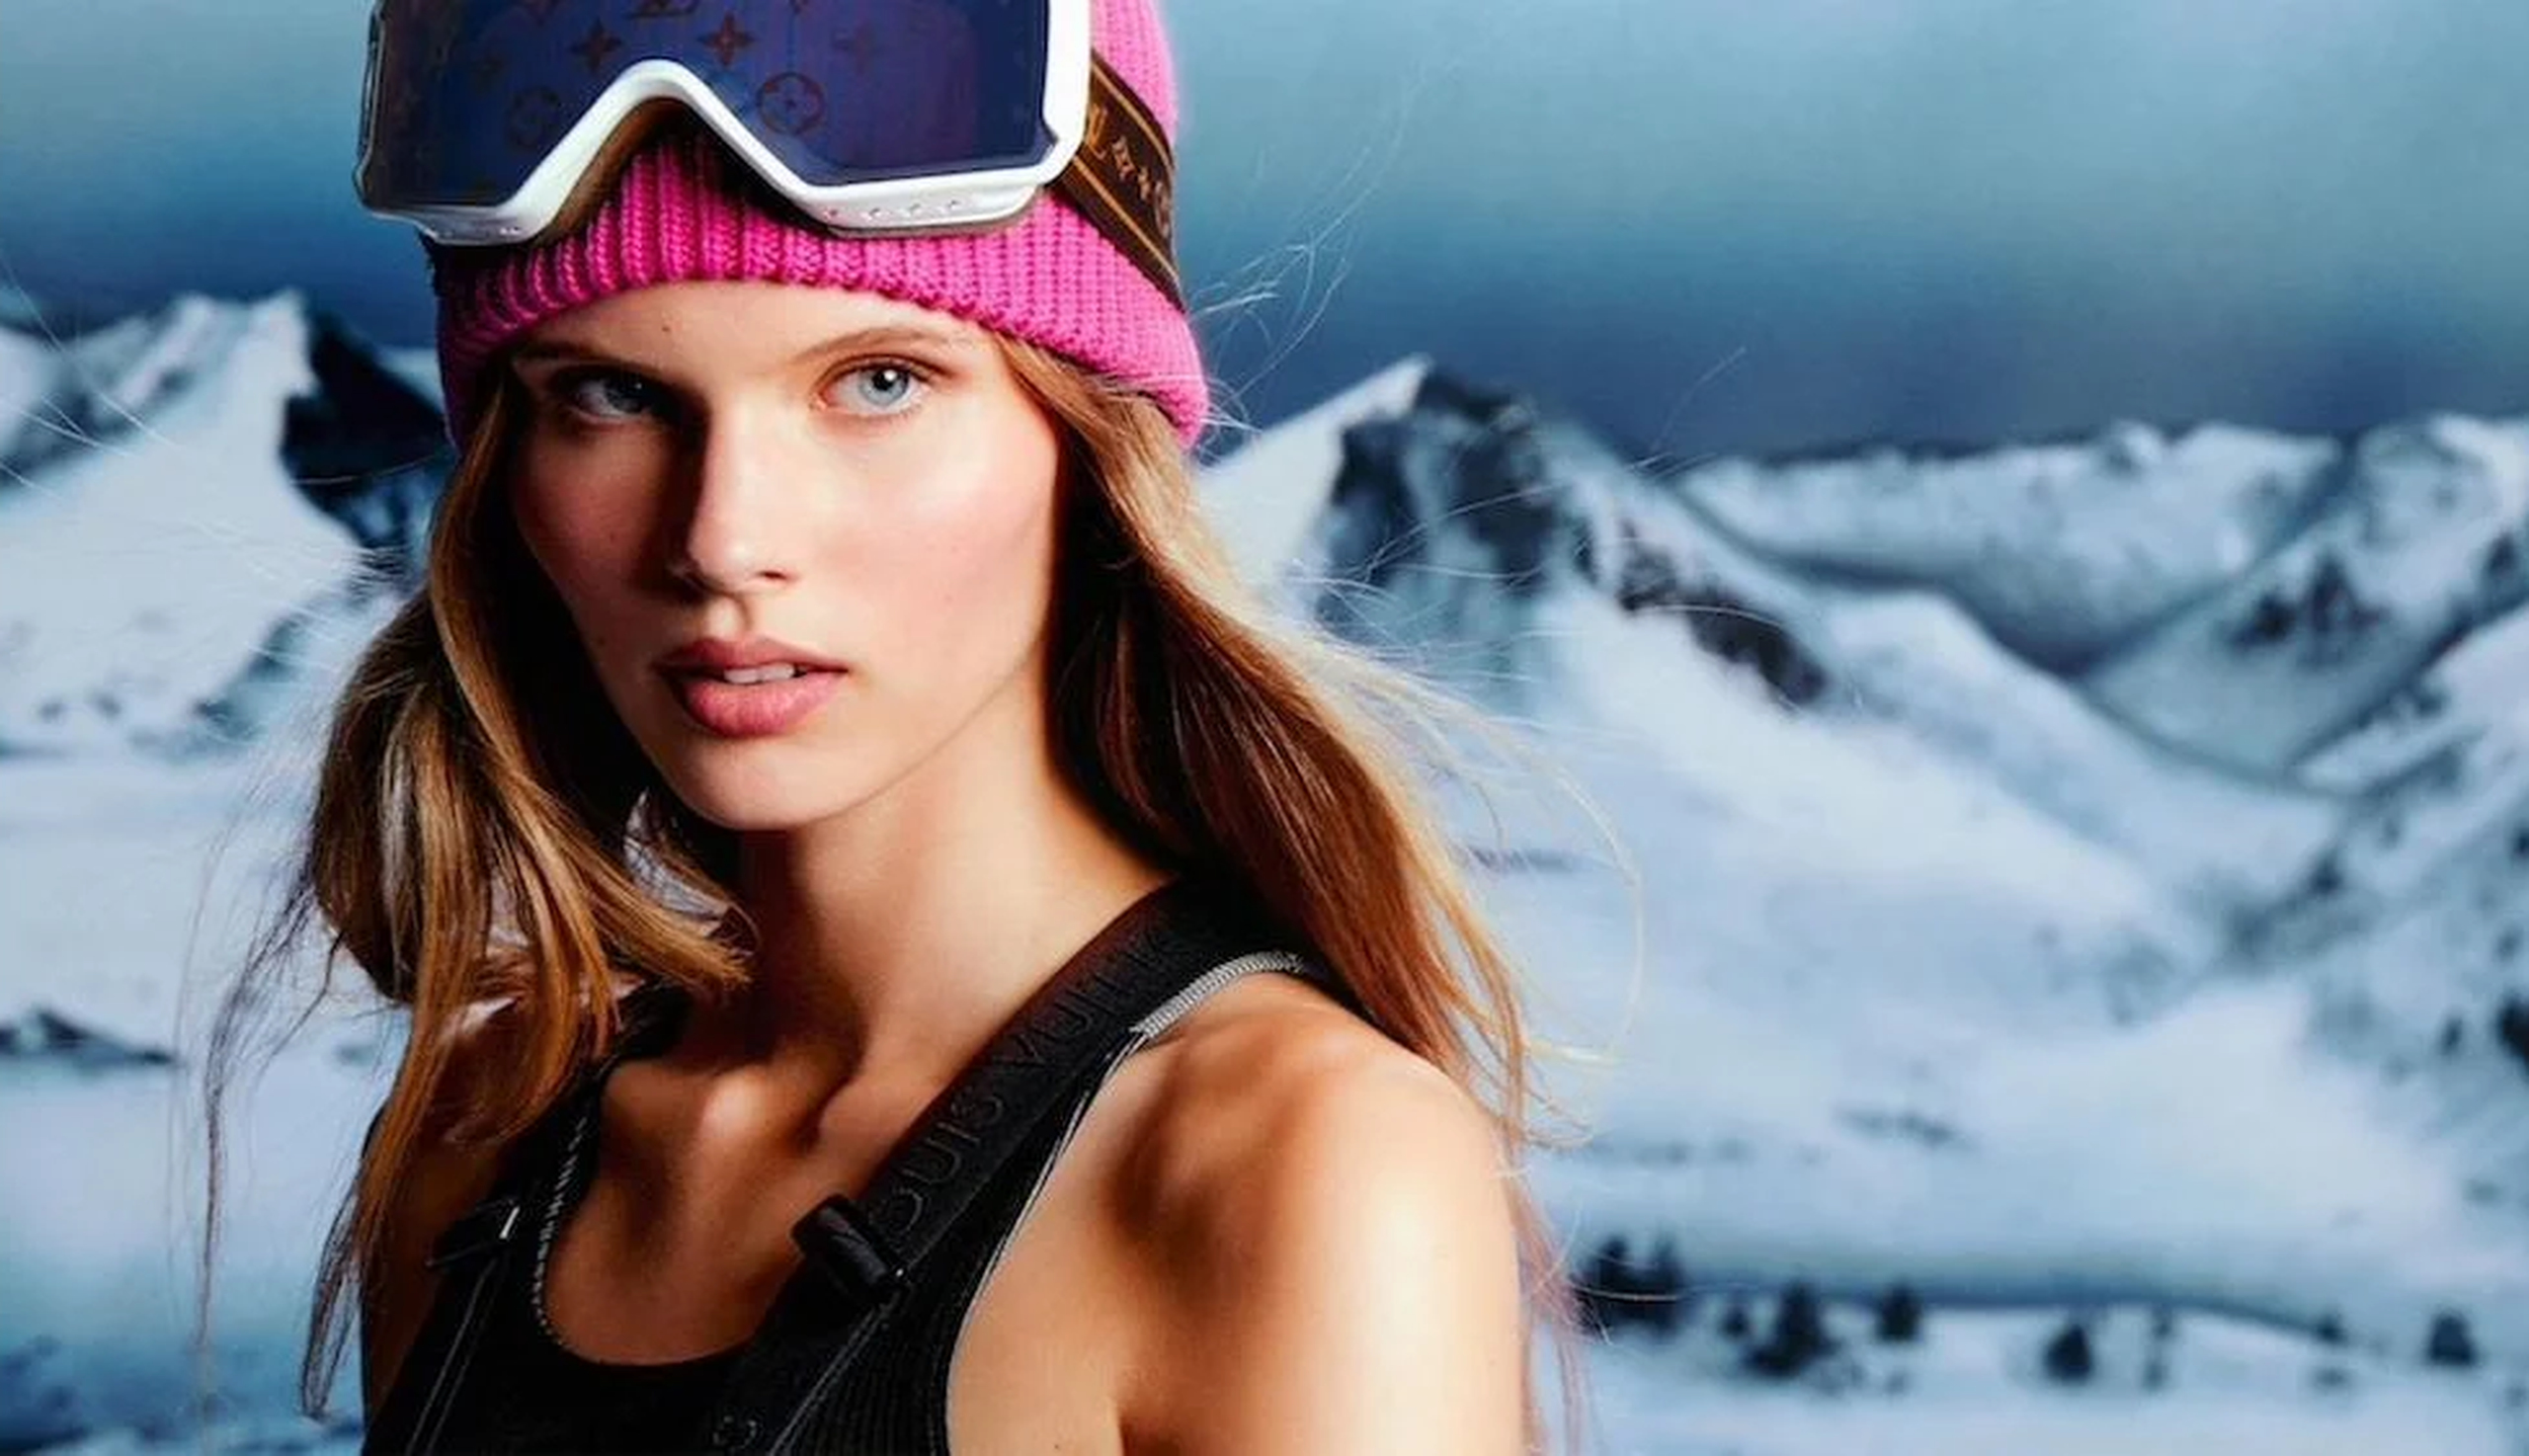 Louis Vuitton launches first ski collection ever - WOWwatchers